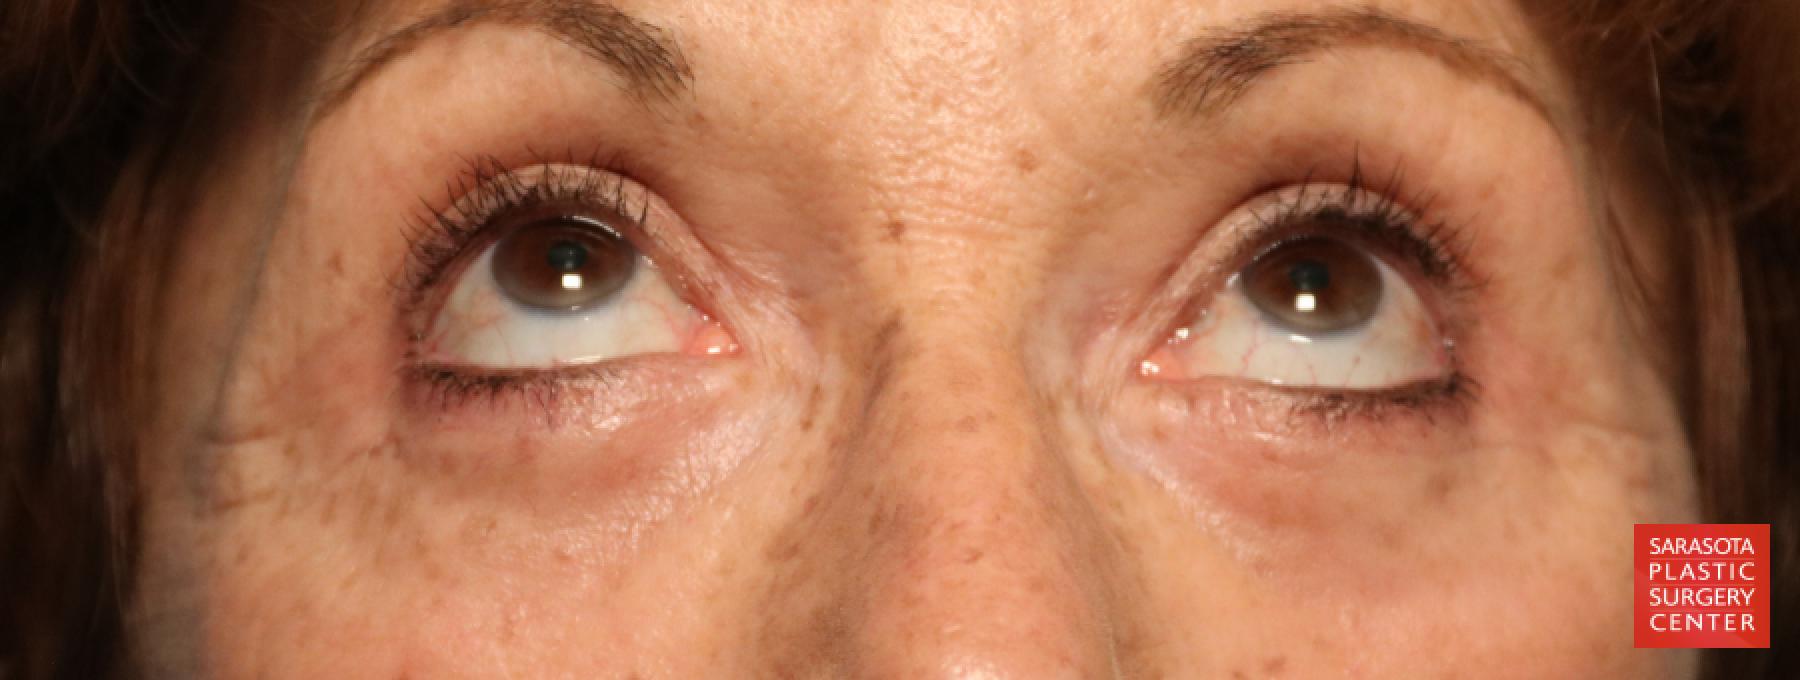 Eyelid Lift: Patient 6 - After 2